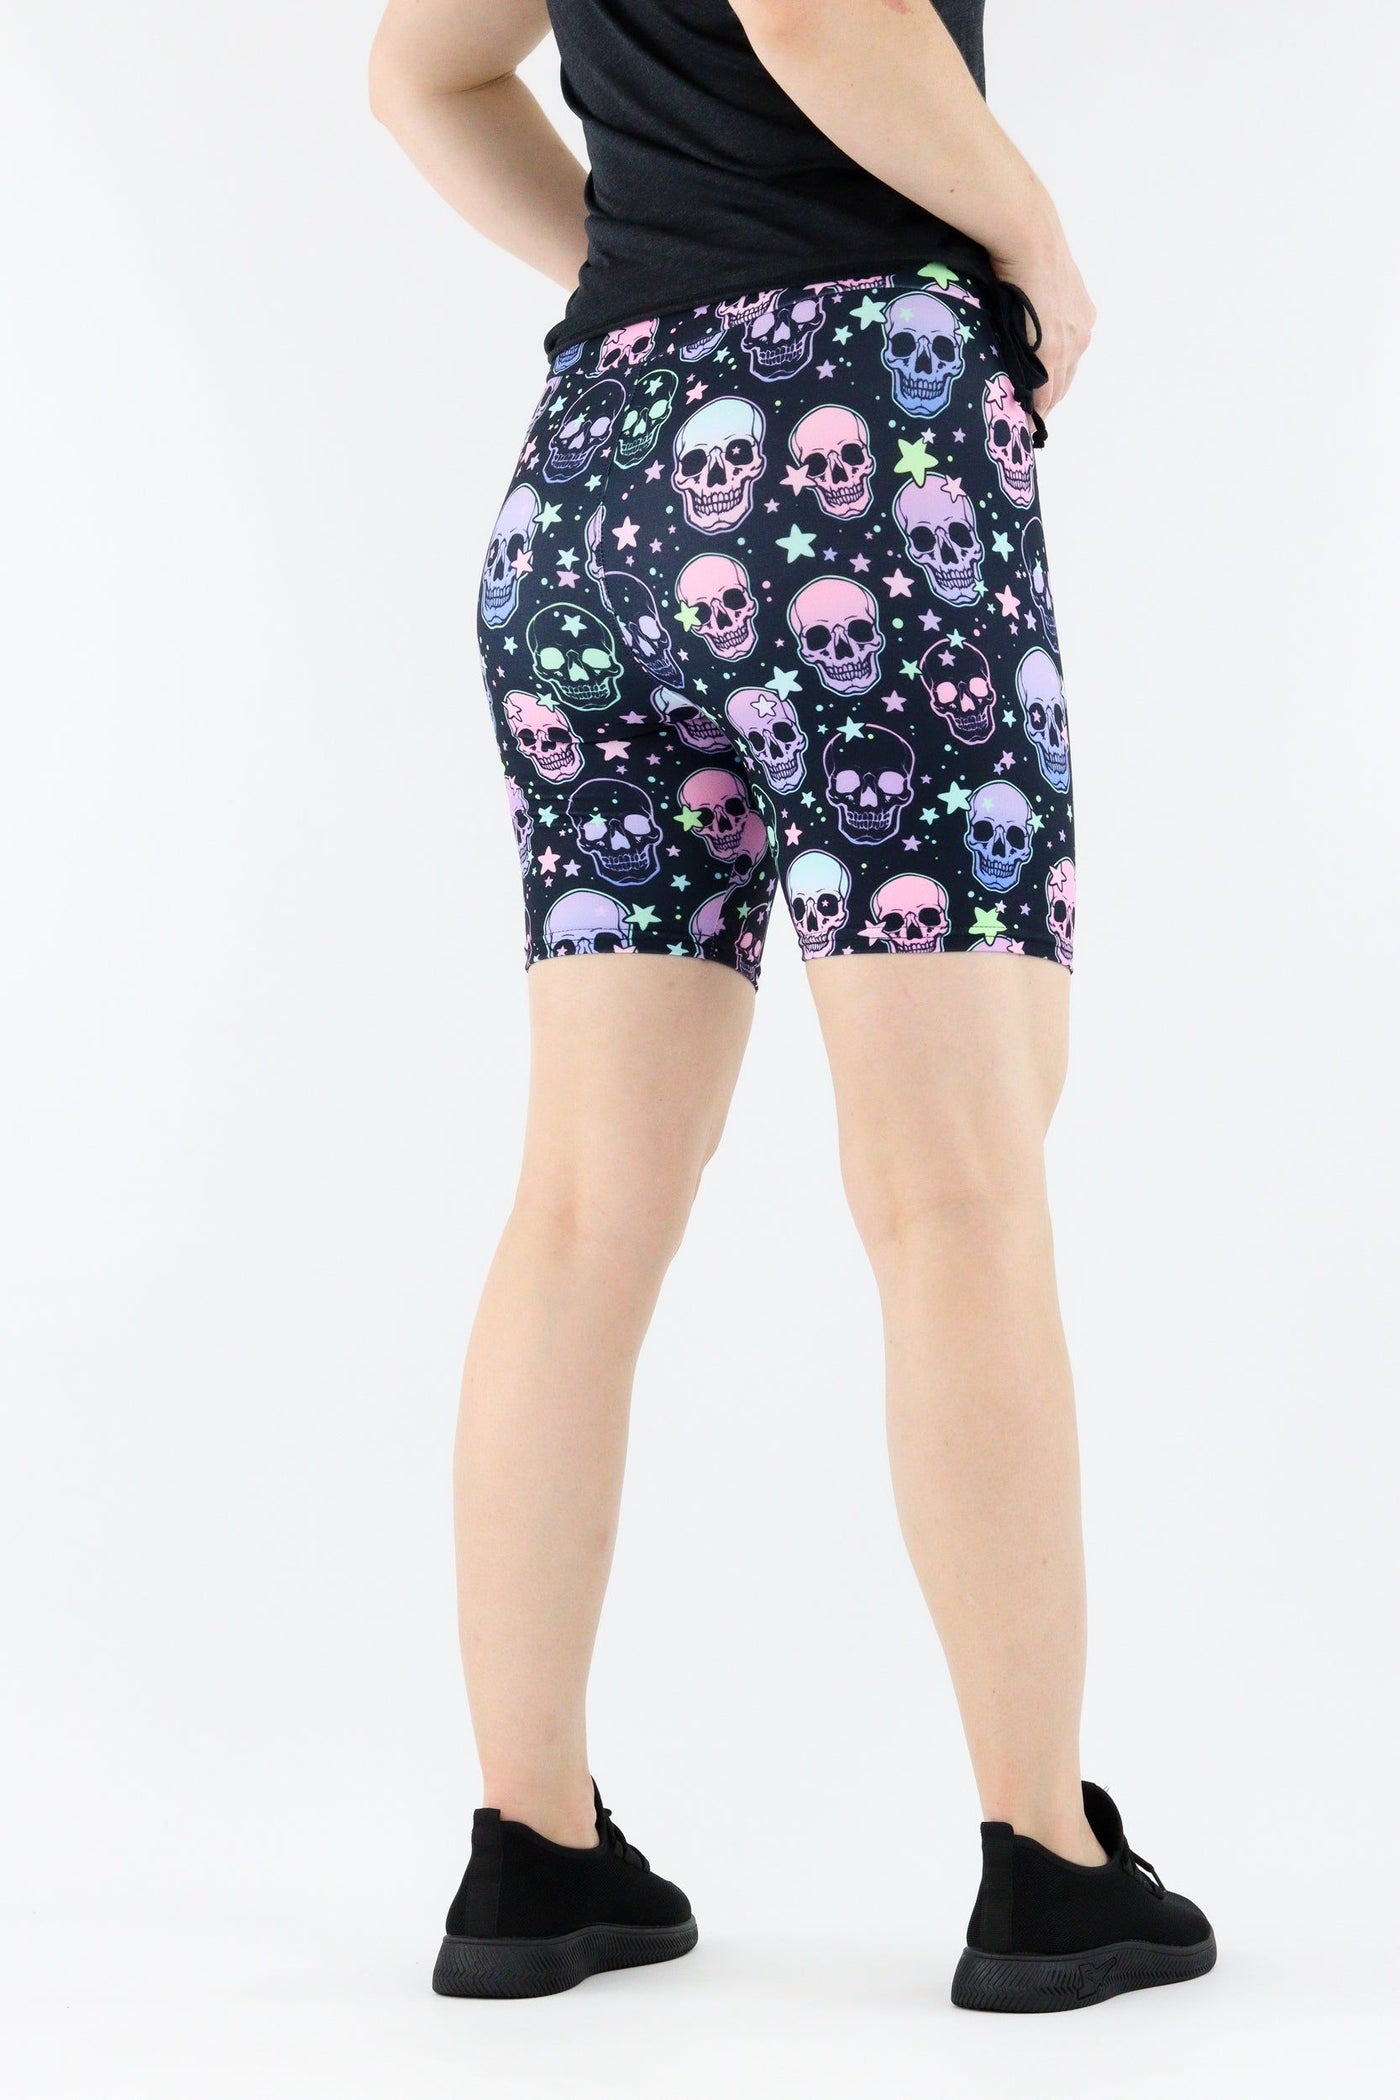 Starry Skull - Casual Mid Shorts Casual Shorts Pawlie   